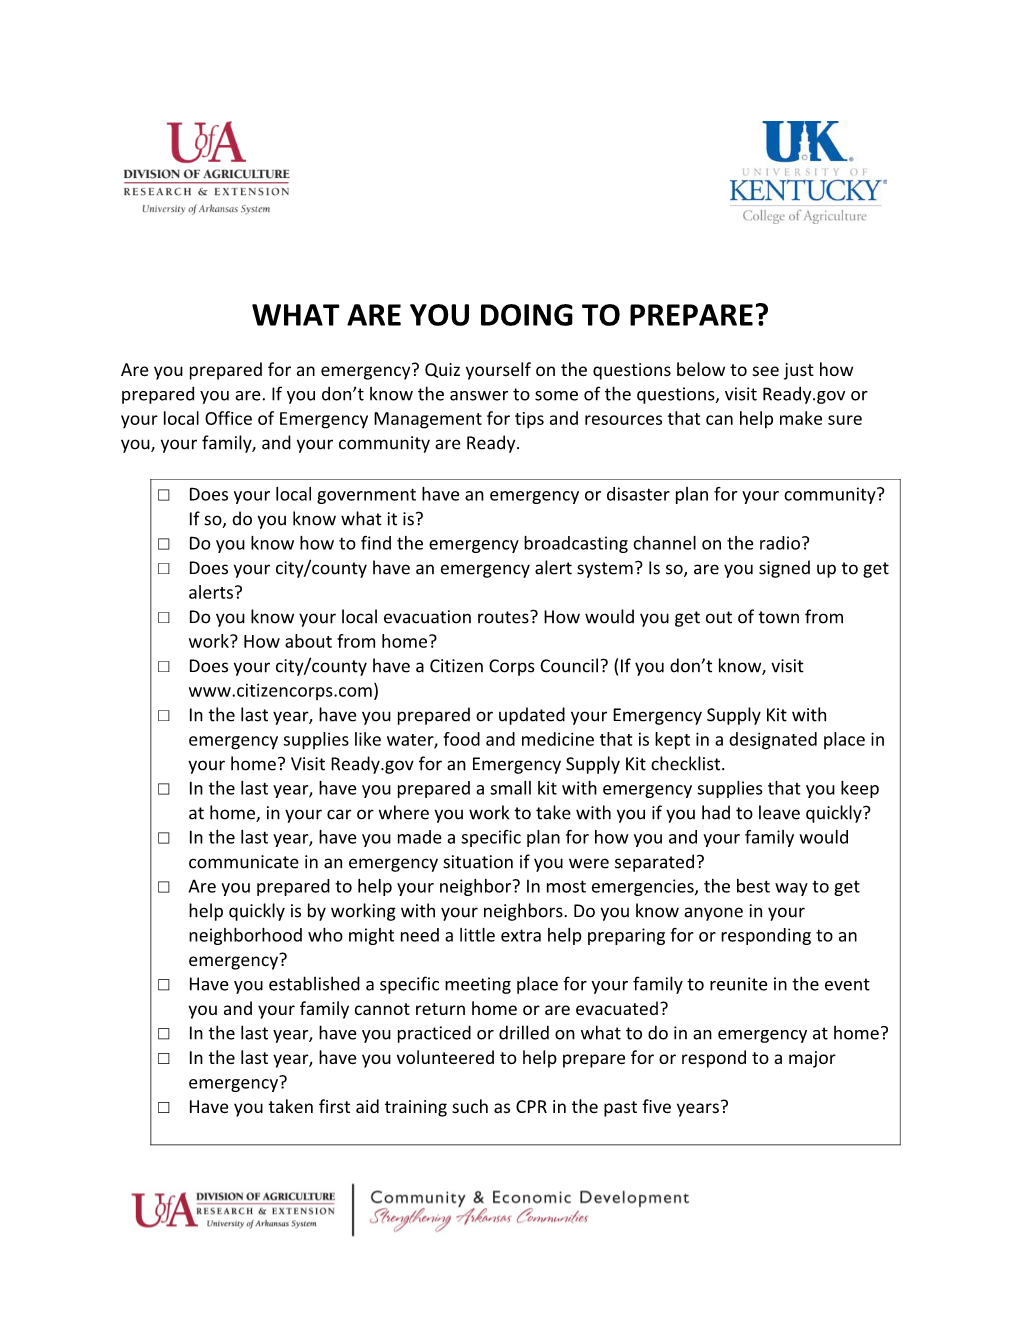 What Are You Doing to Prepare?